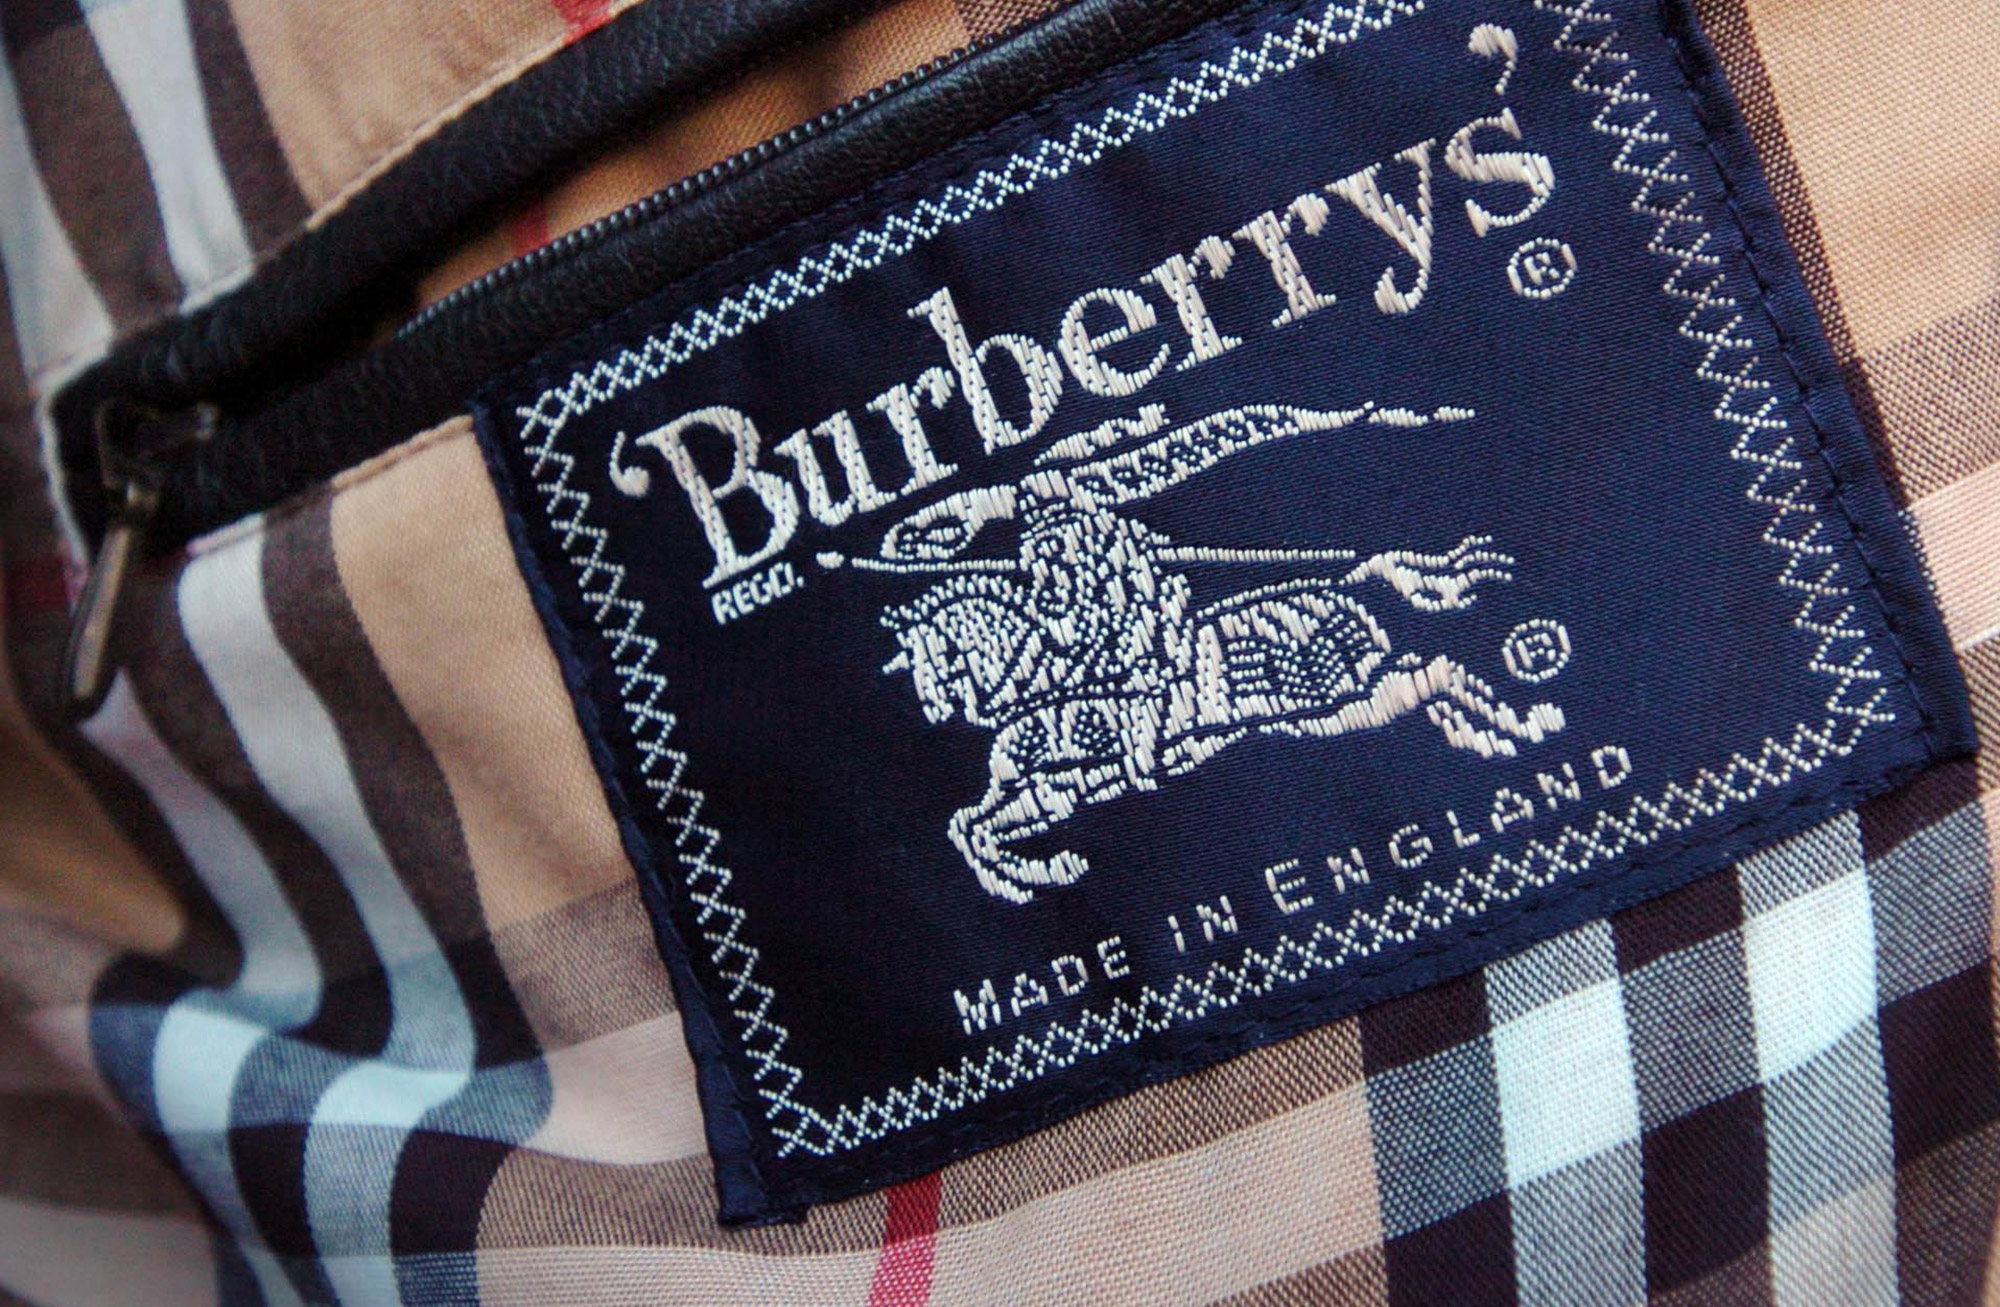 burberry outlet online authentic